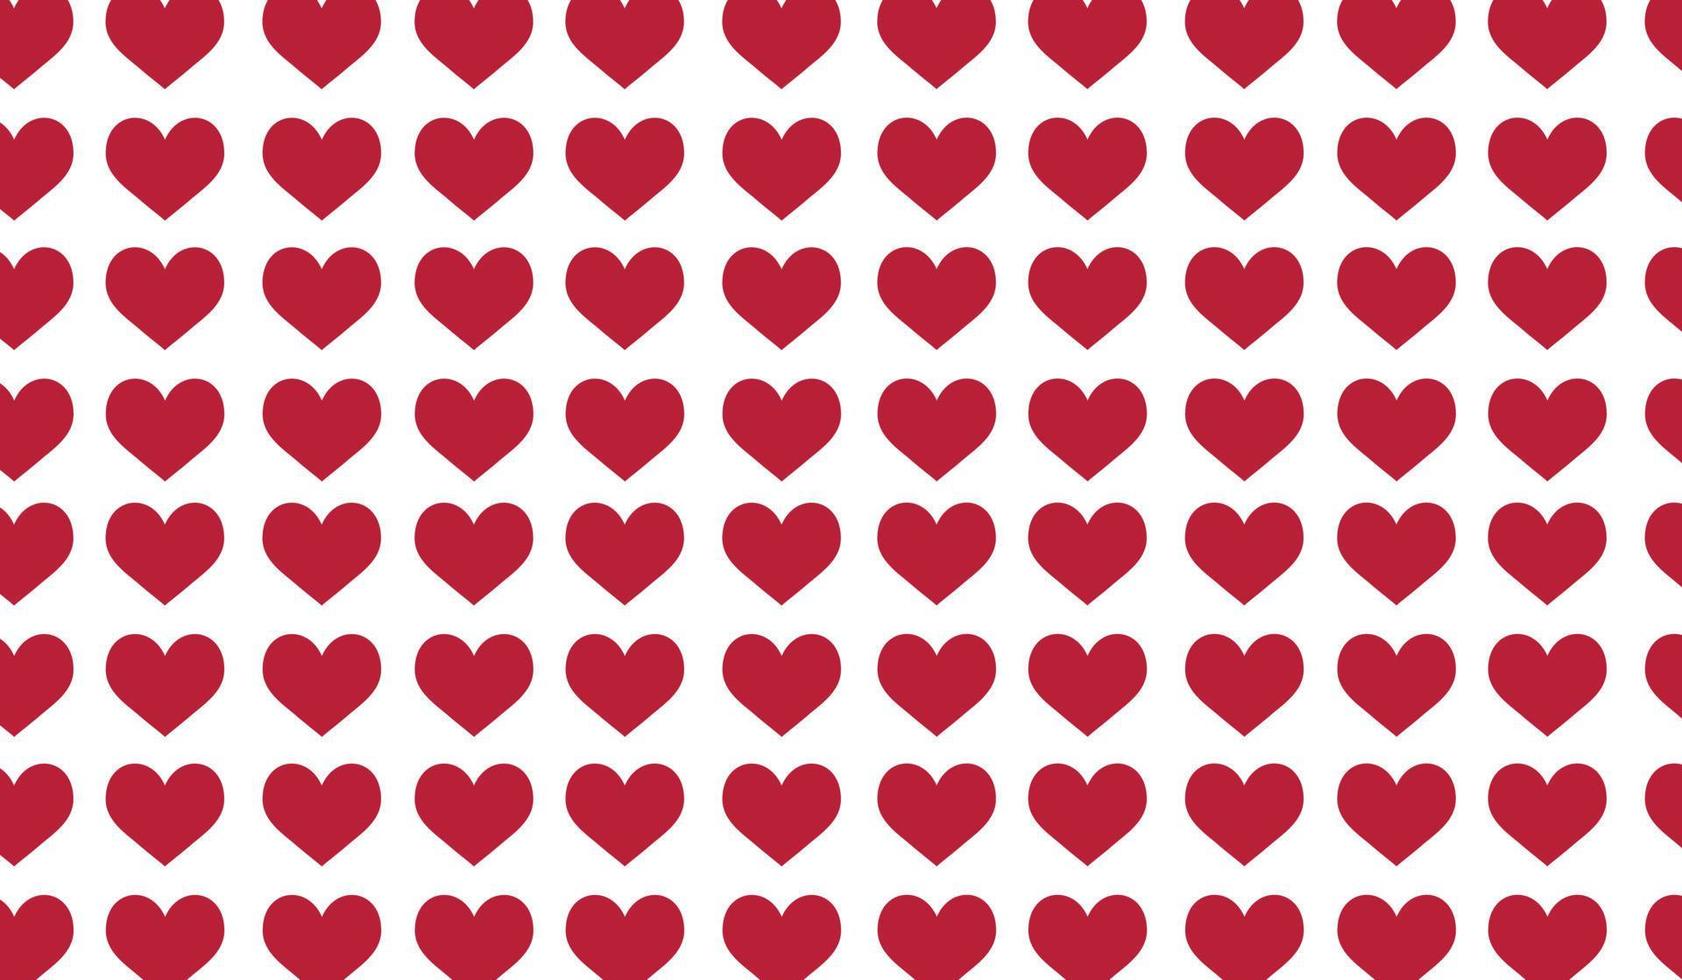 Red hearts on white background seamless pattern for Valentine's Day vector